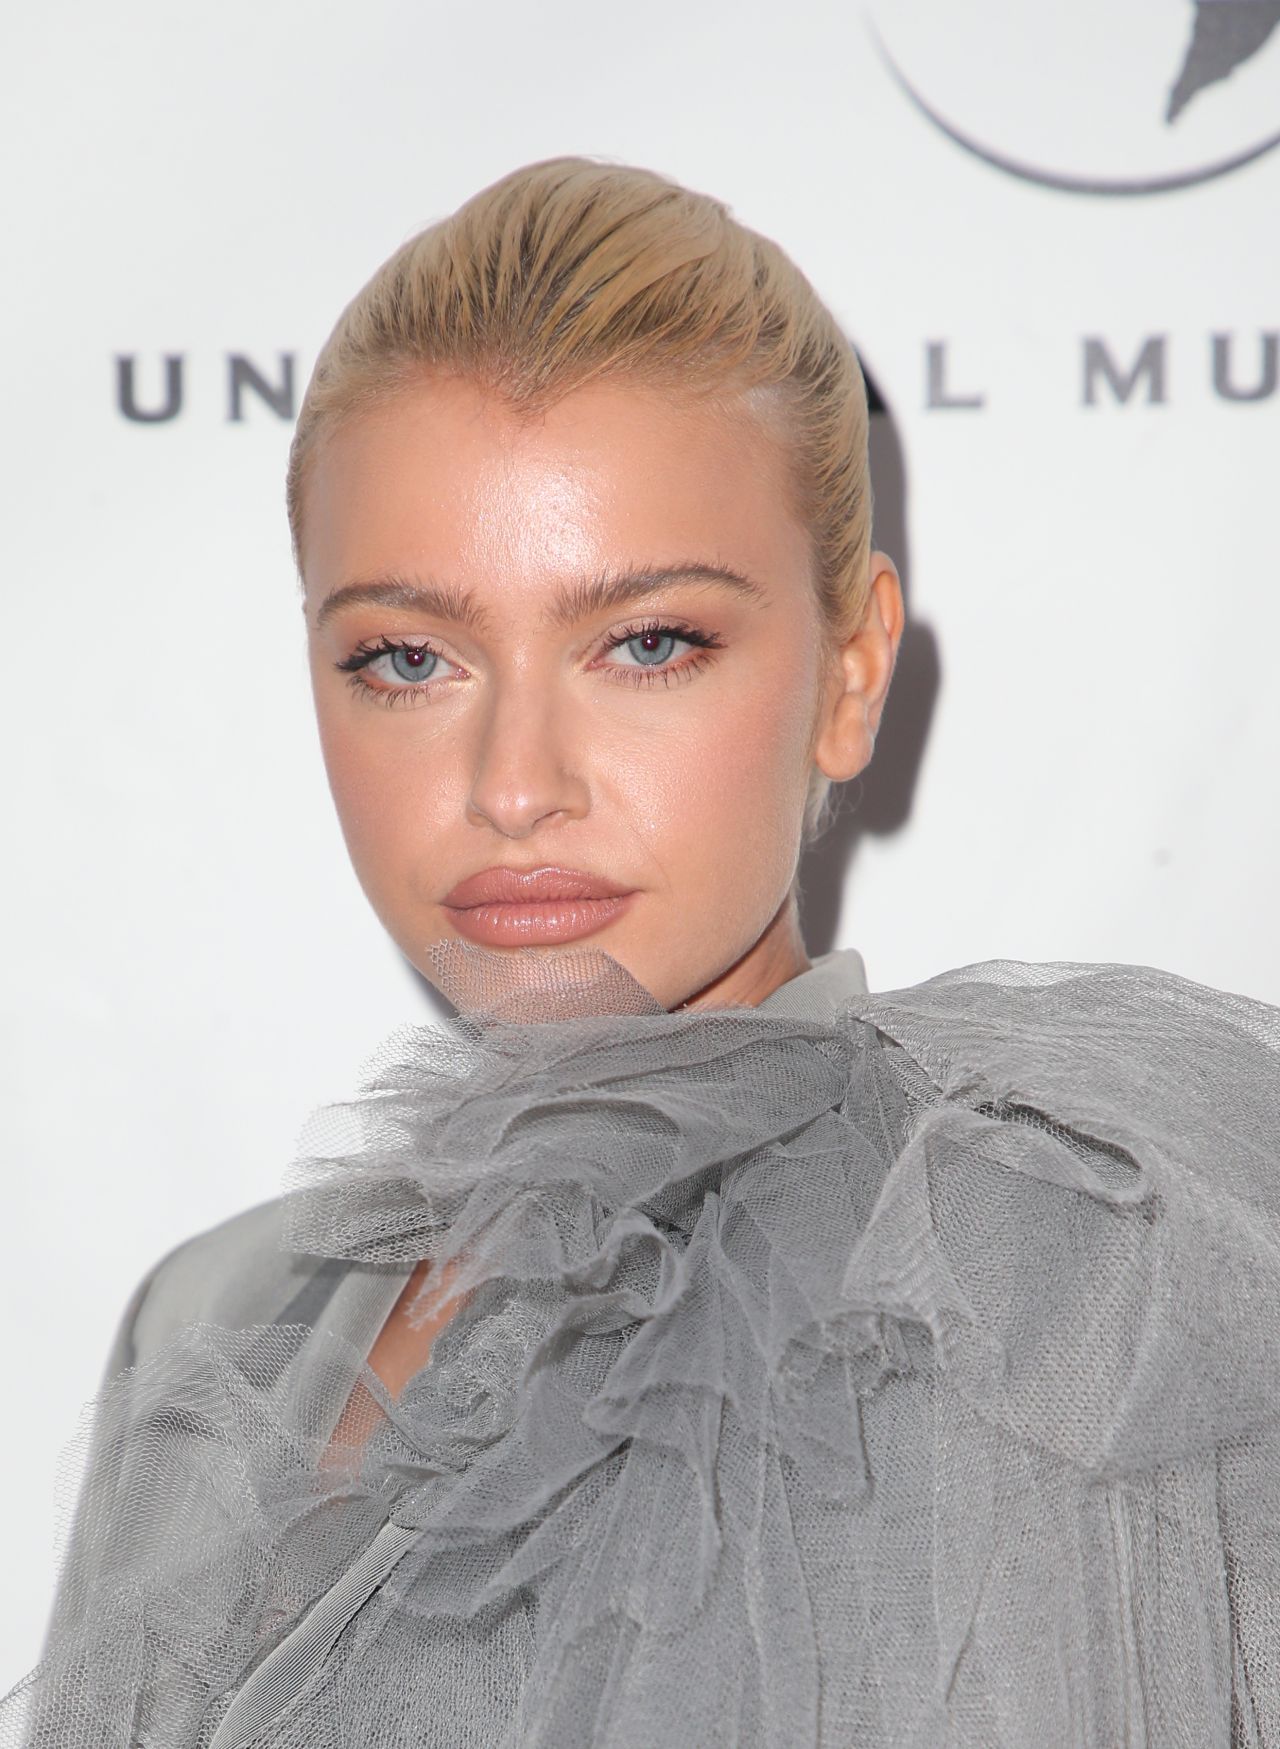 alice-chater-universal-music-group-grammy-after-party-02-10-2019-2.jpg